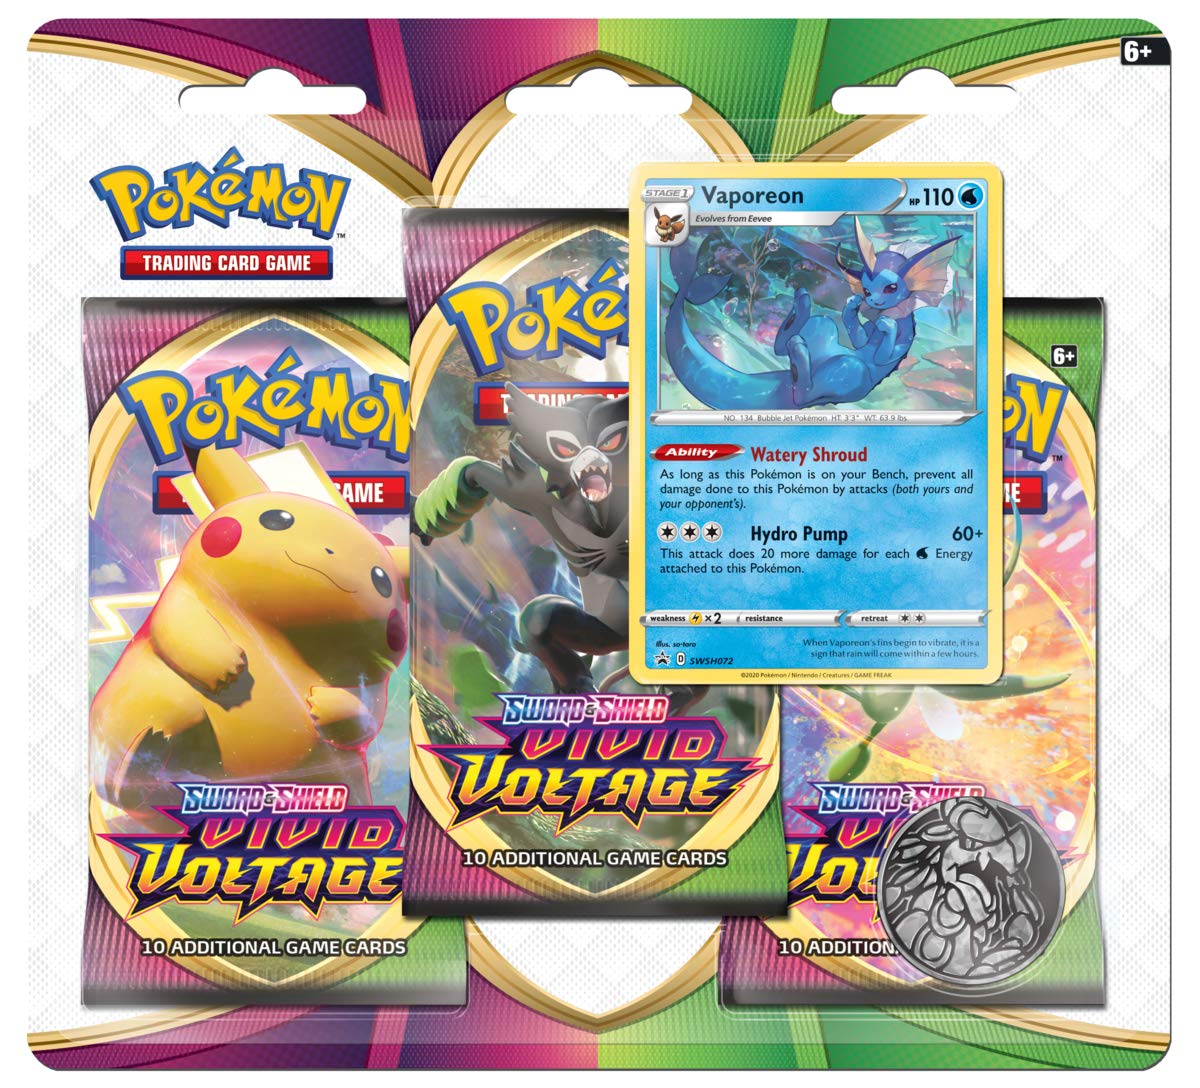 Pokemon TCG: Sword & Shield Vivid Voltage Blister Pack with 3 Booster Packs and Featuring Vaporeon